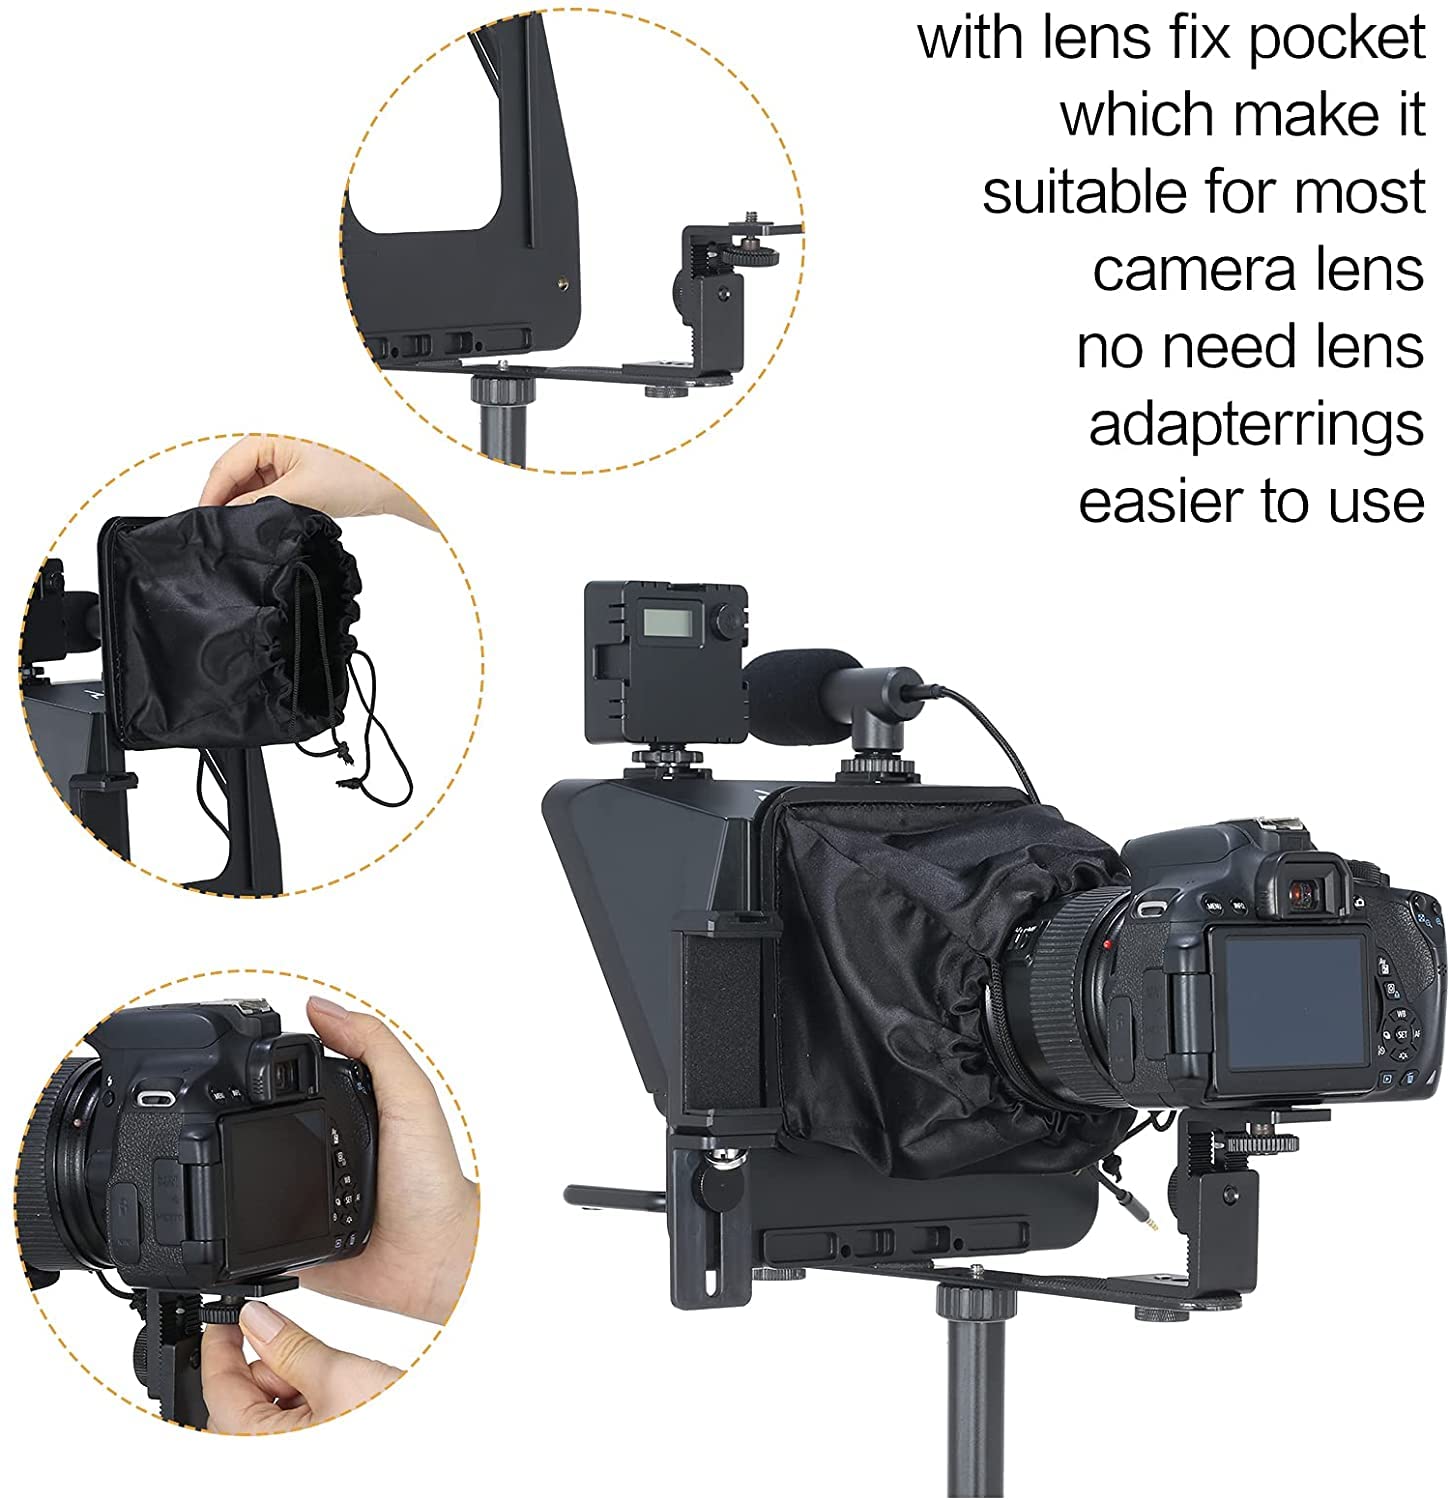 Inmei A10 Teleprompter Portable Smartphone DSLR Camera Teleprompter Prompter with Phone Holder Remote Control for Video Recording Live Streaming Interview Stage Presentation Speech Video Making Tools